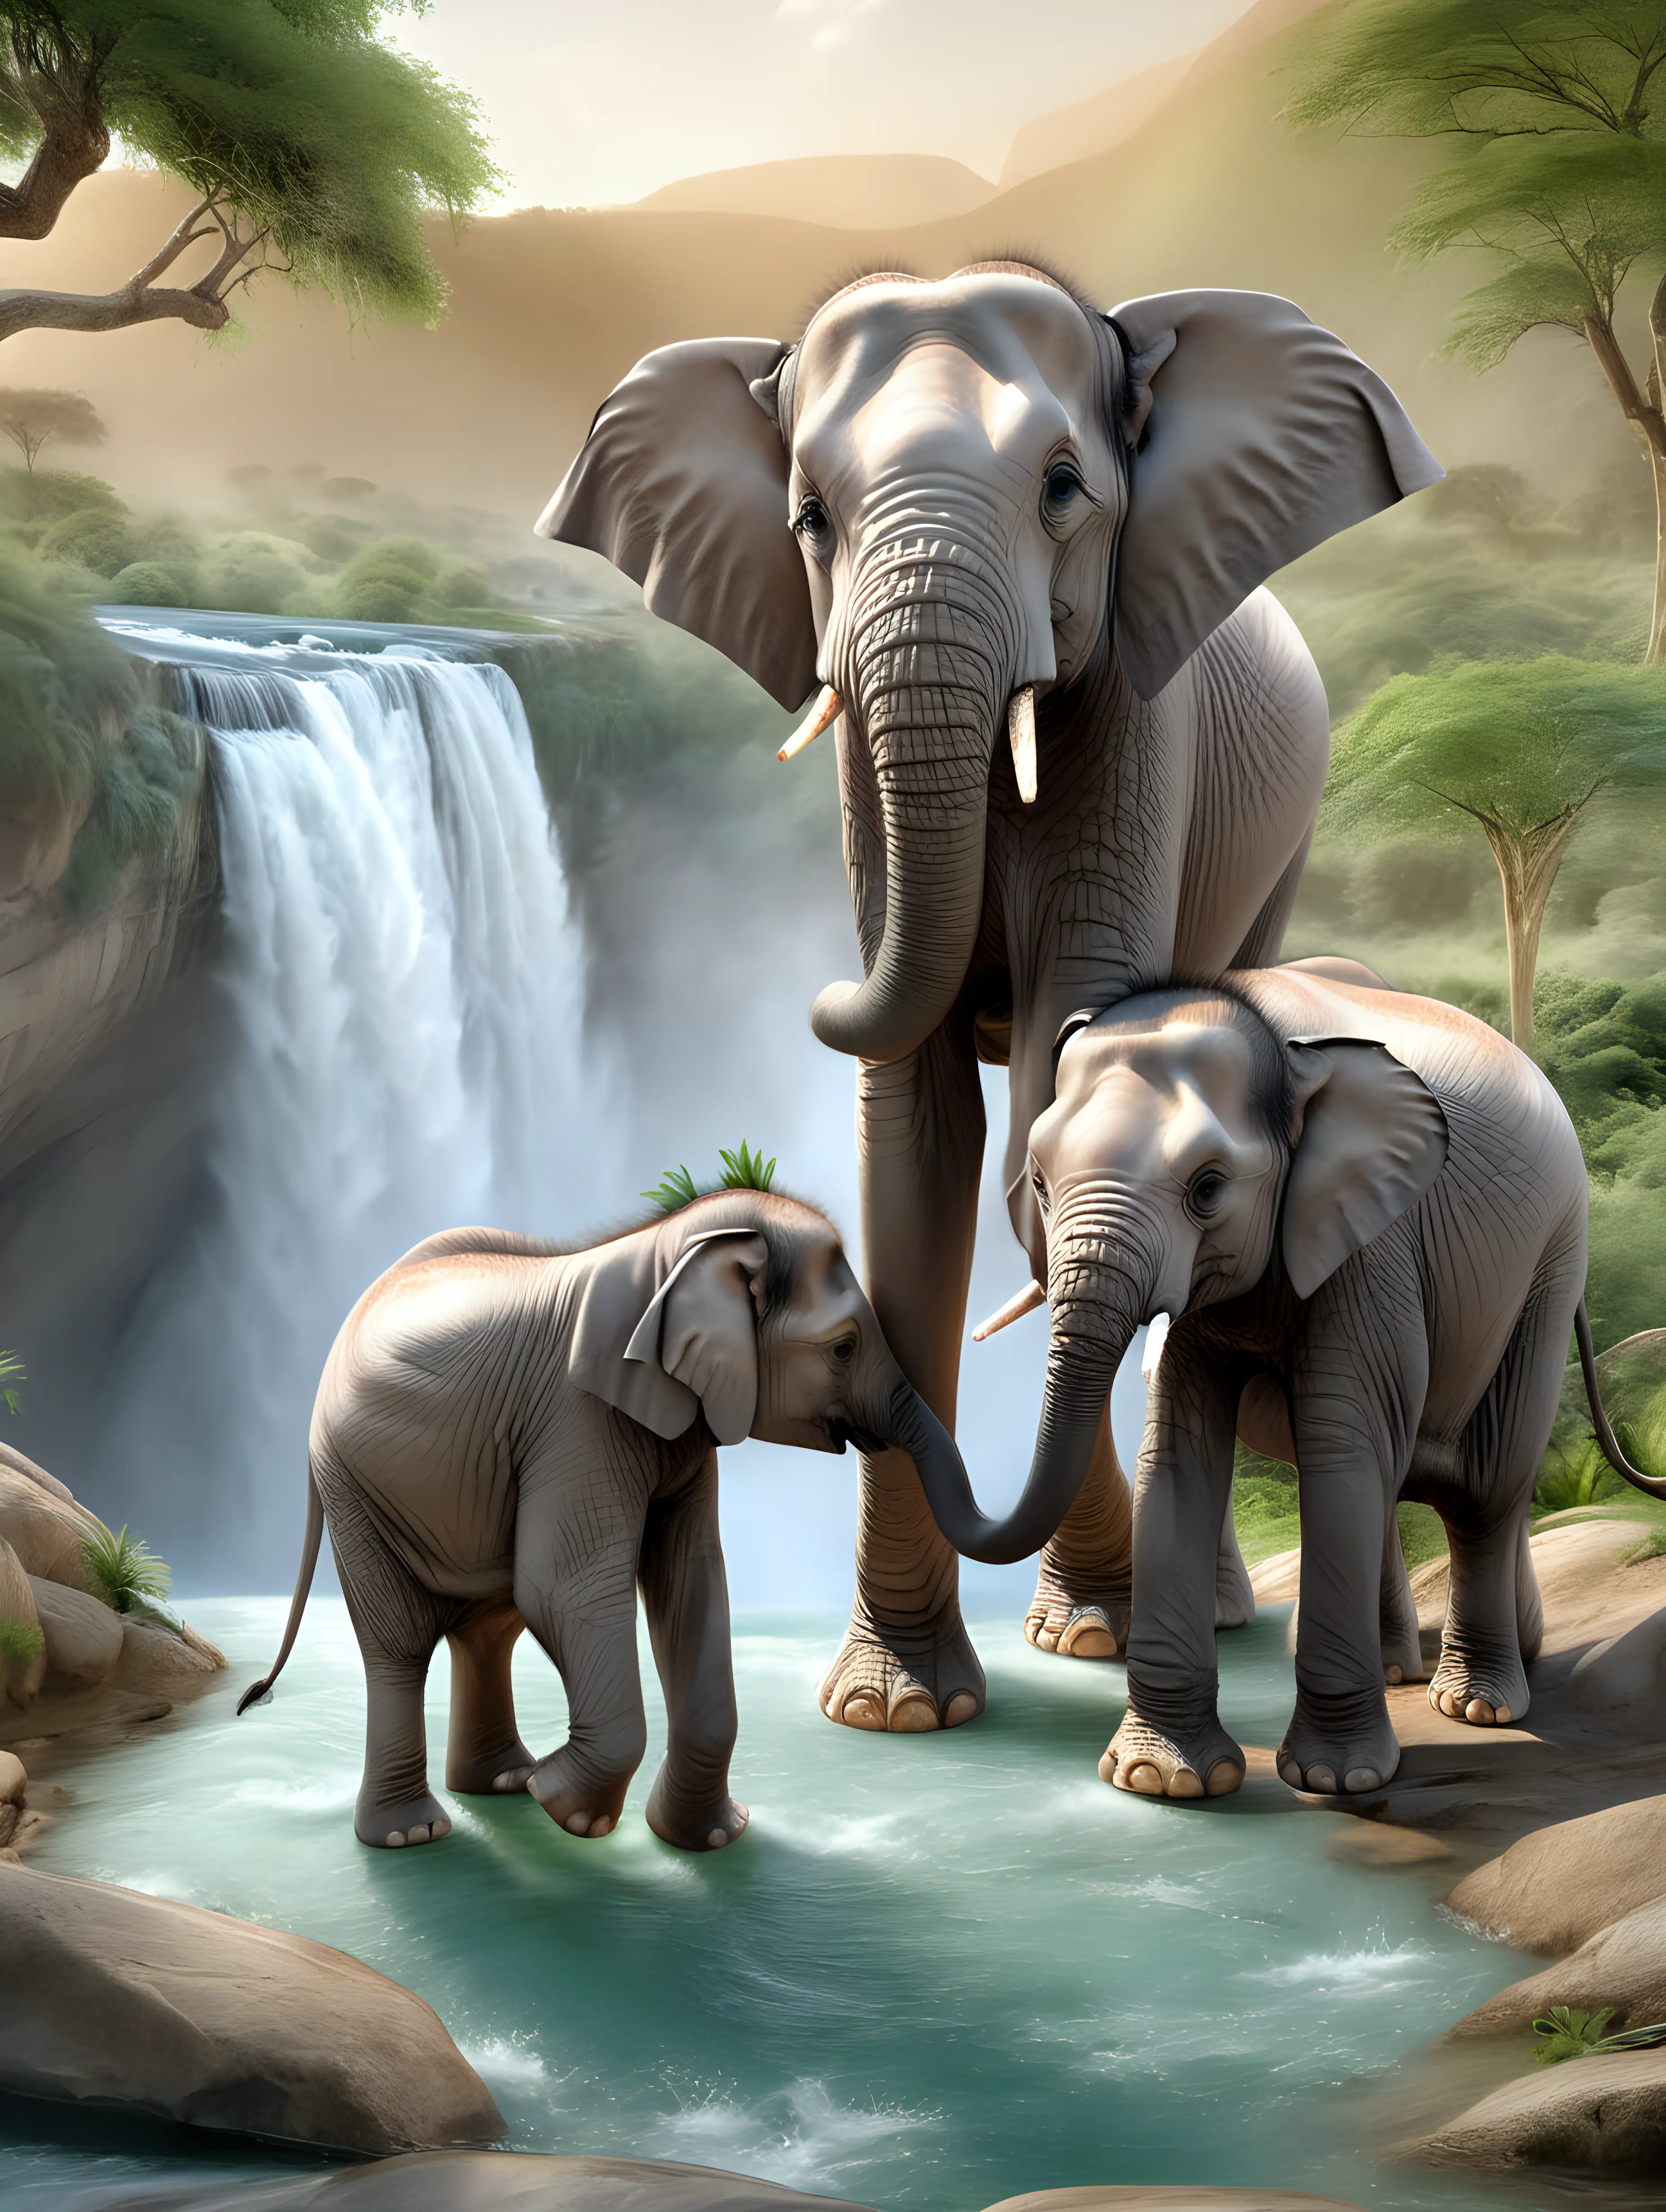 Elephant Family Nurturing Their Young by a Serene Waterfall